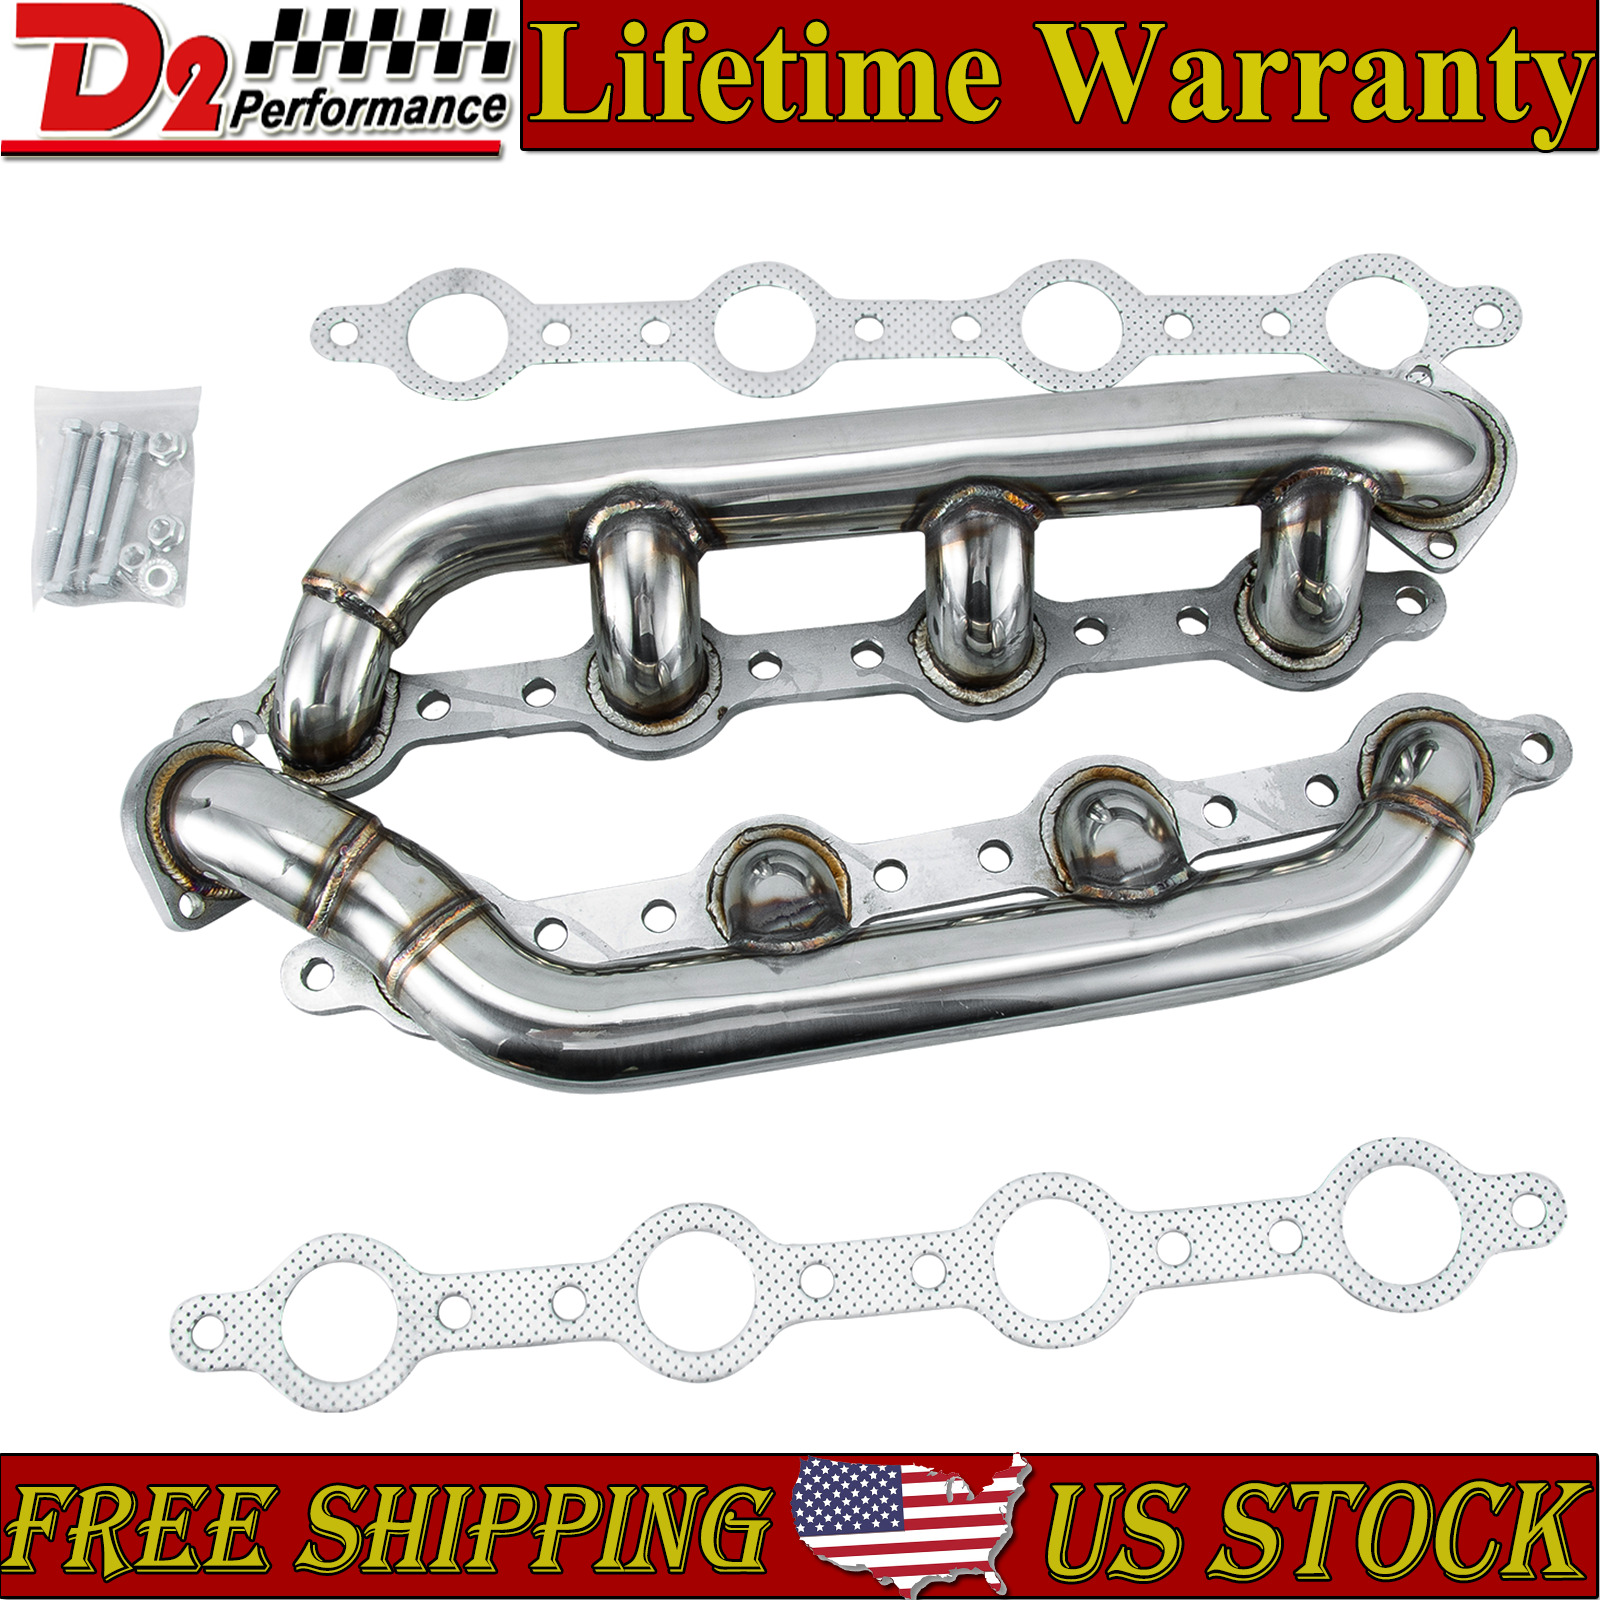 Stainless Steel Headers Manifold For 99-03 Ford 7.3L F250 F350 F450 Powerstroke